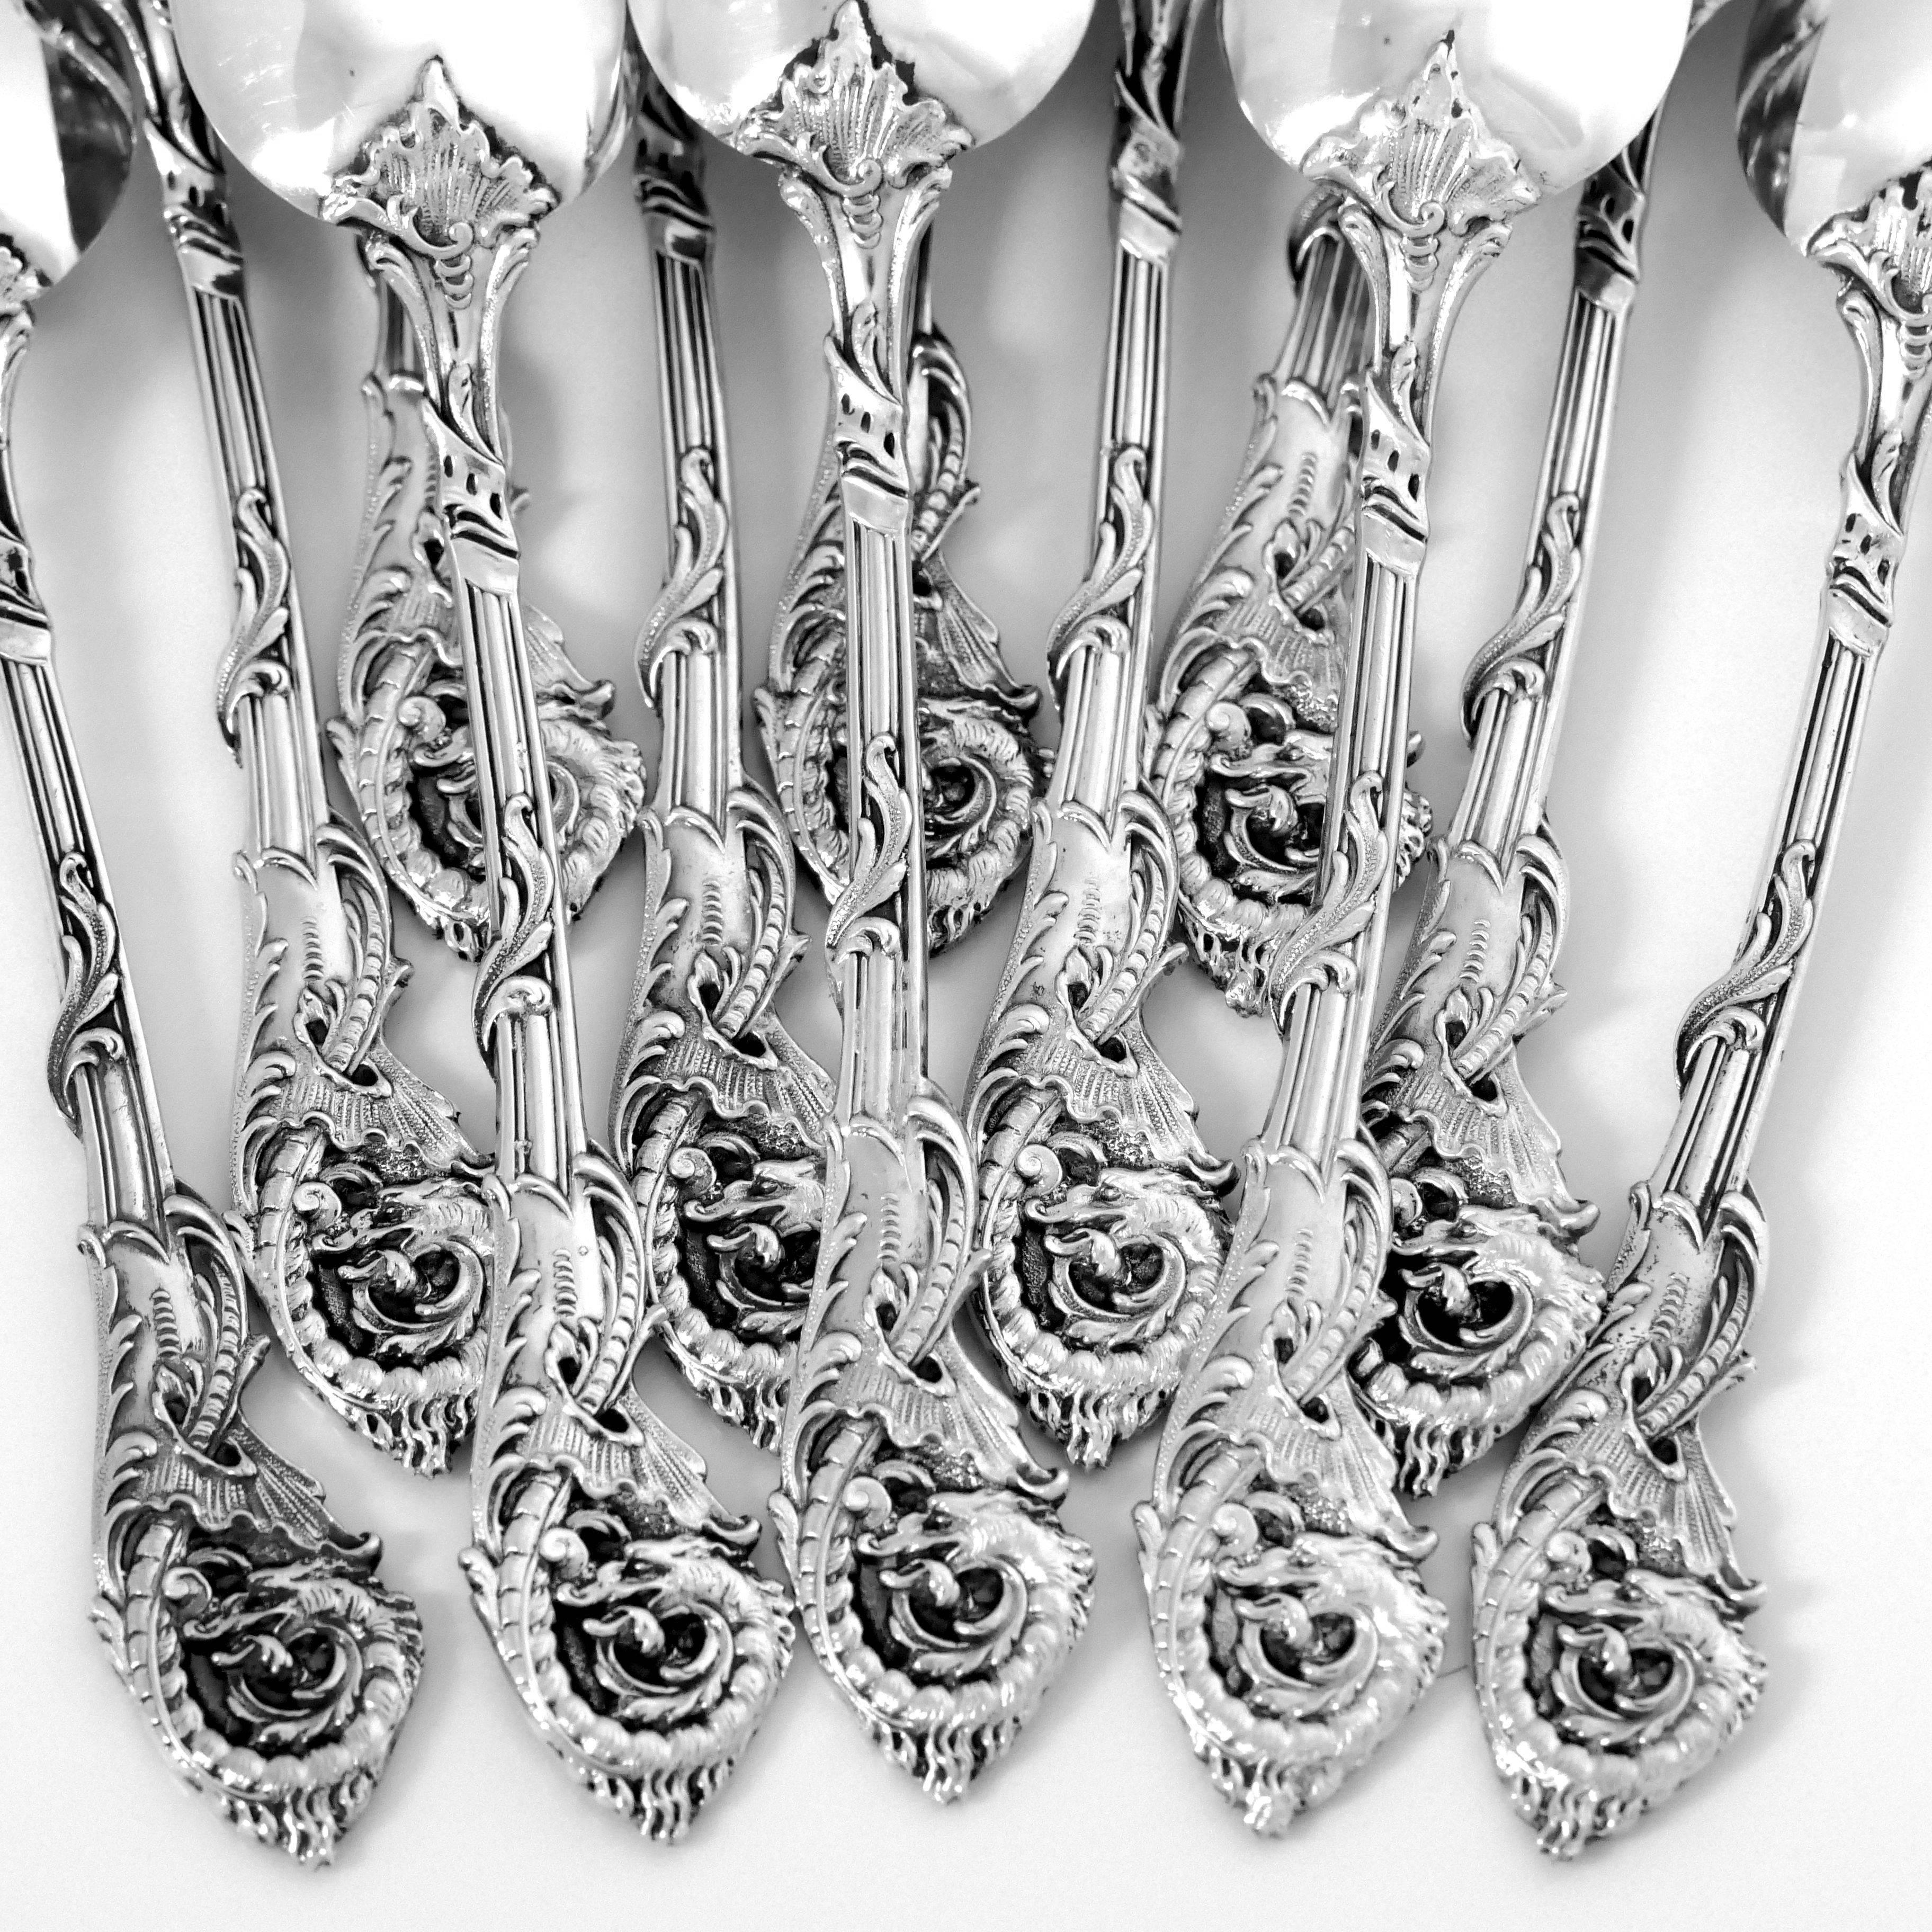 Veyrat Rare French Sterling Silver 18k Gold Tea Coffee Spoons Set 12 Pc, Dragon For Sale 4